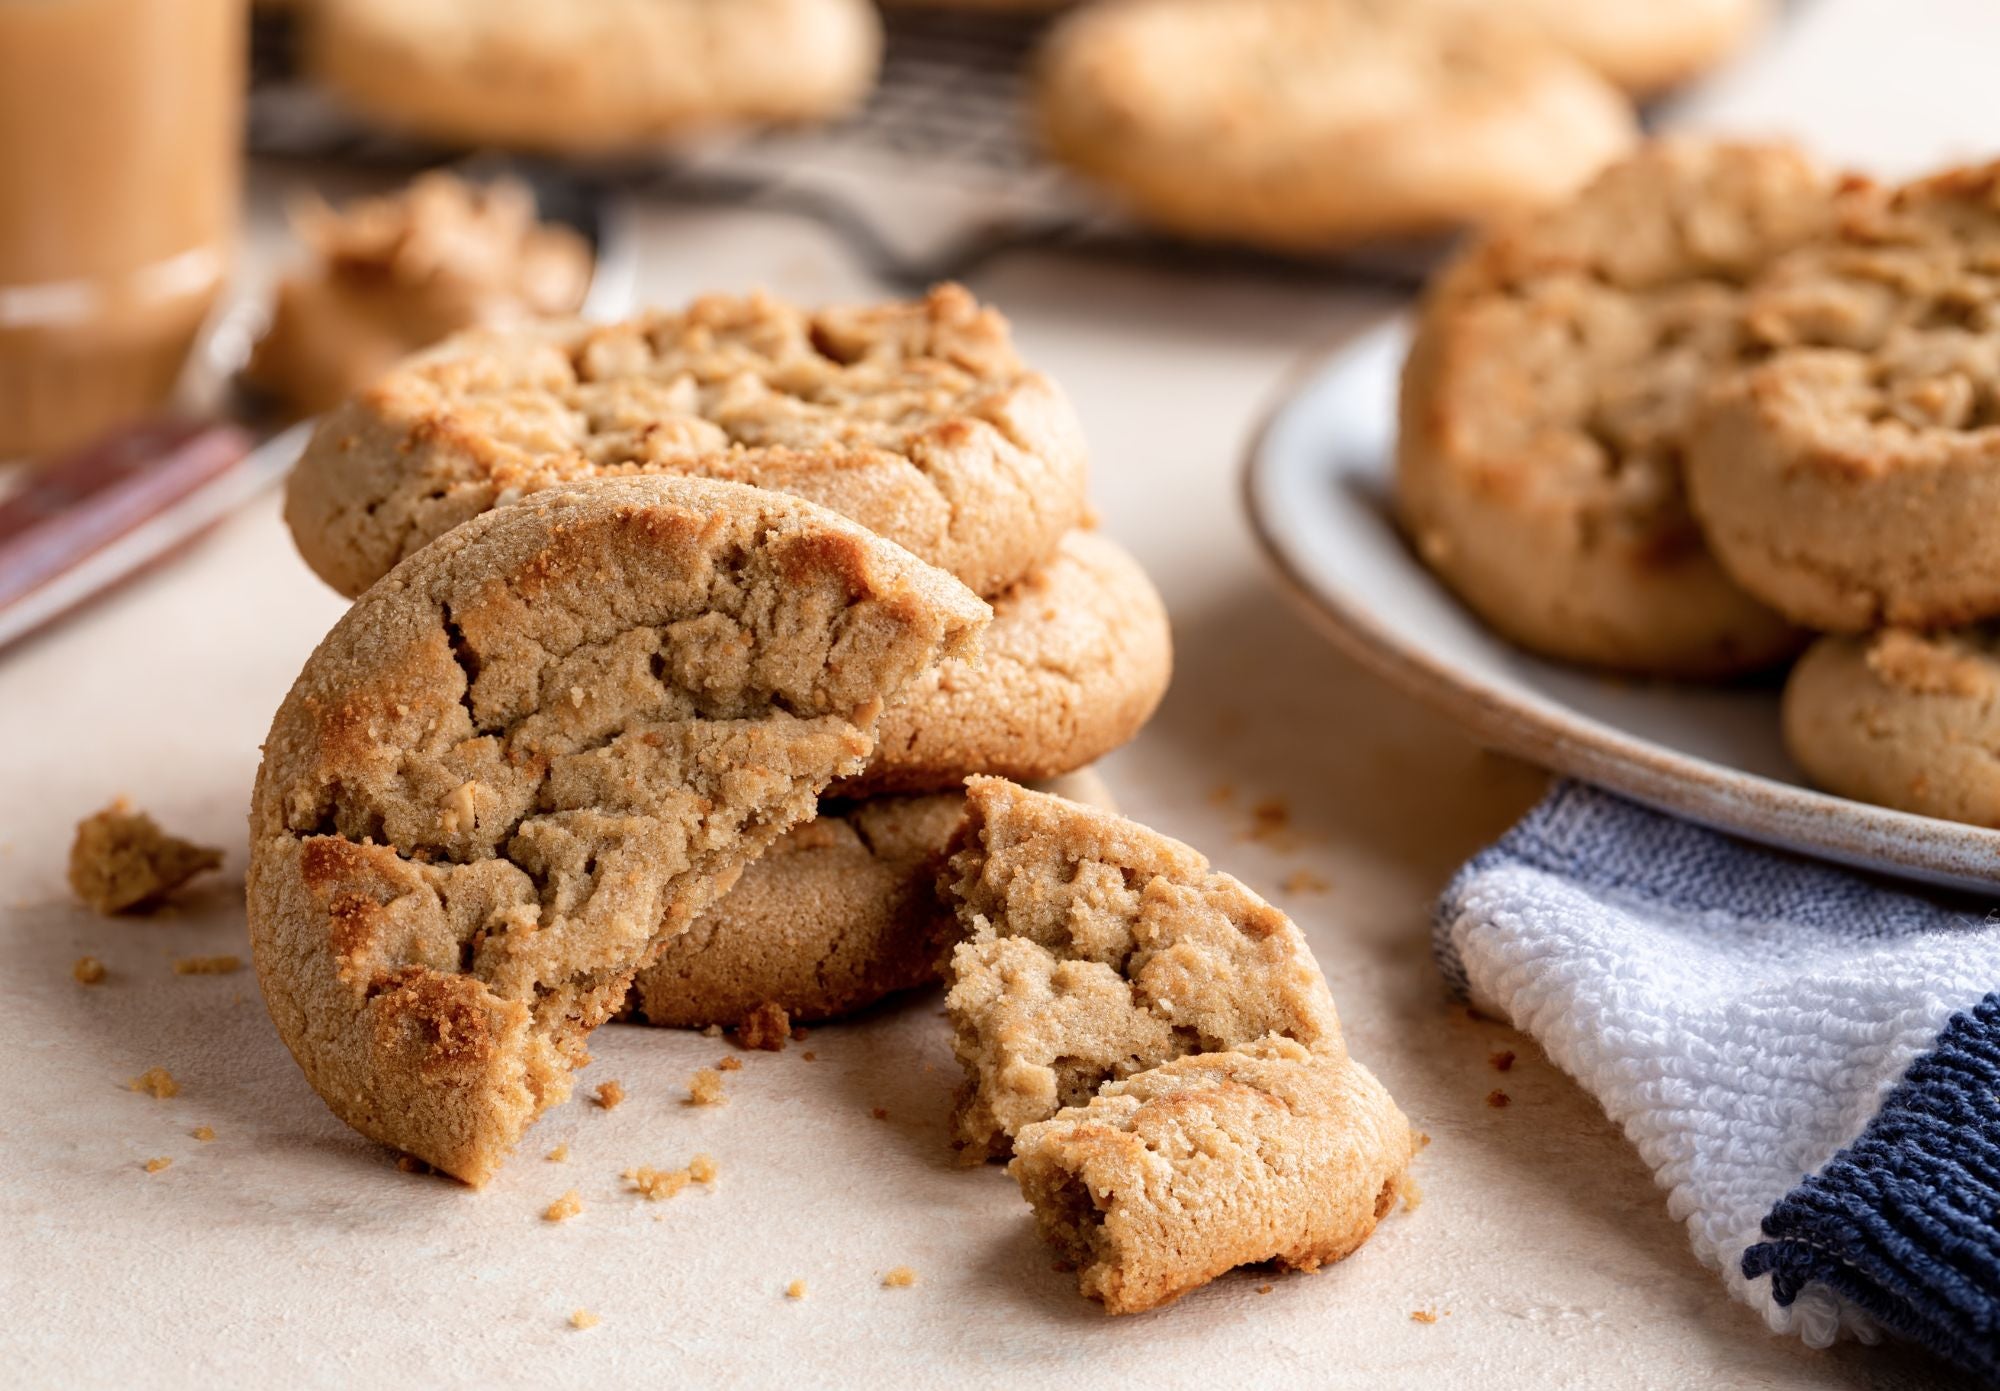 Energize Your Post-Workout Munchies with Homemade Peanut Butter Cookies